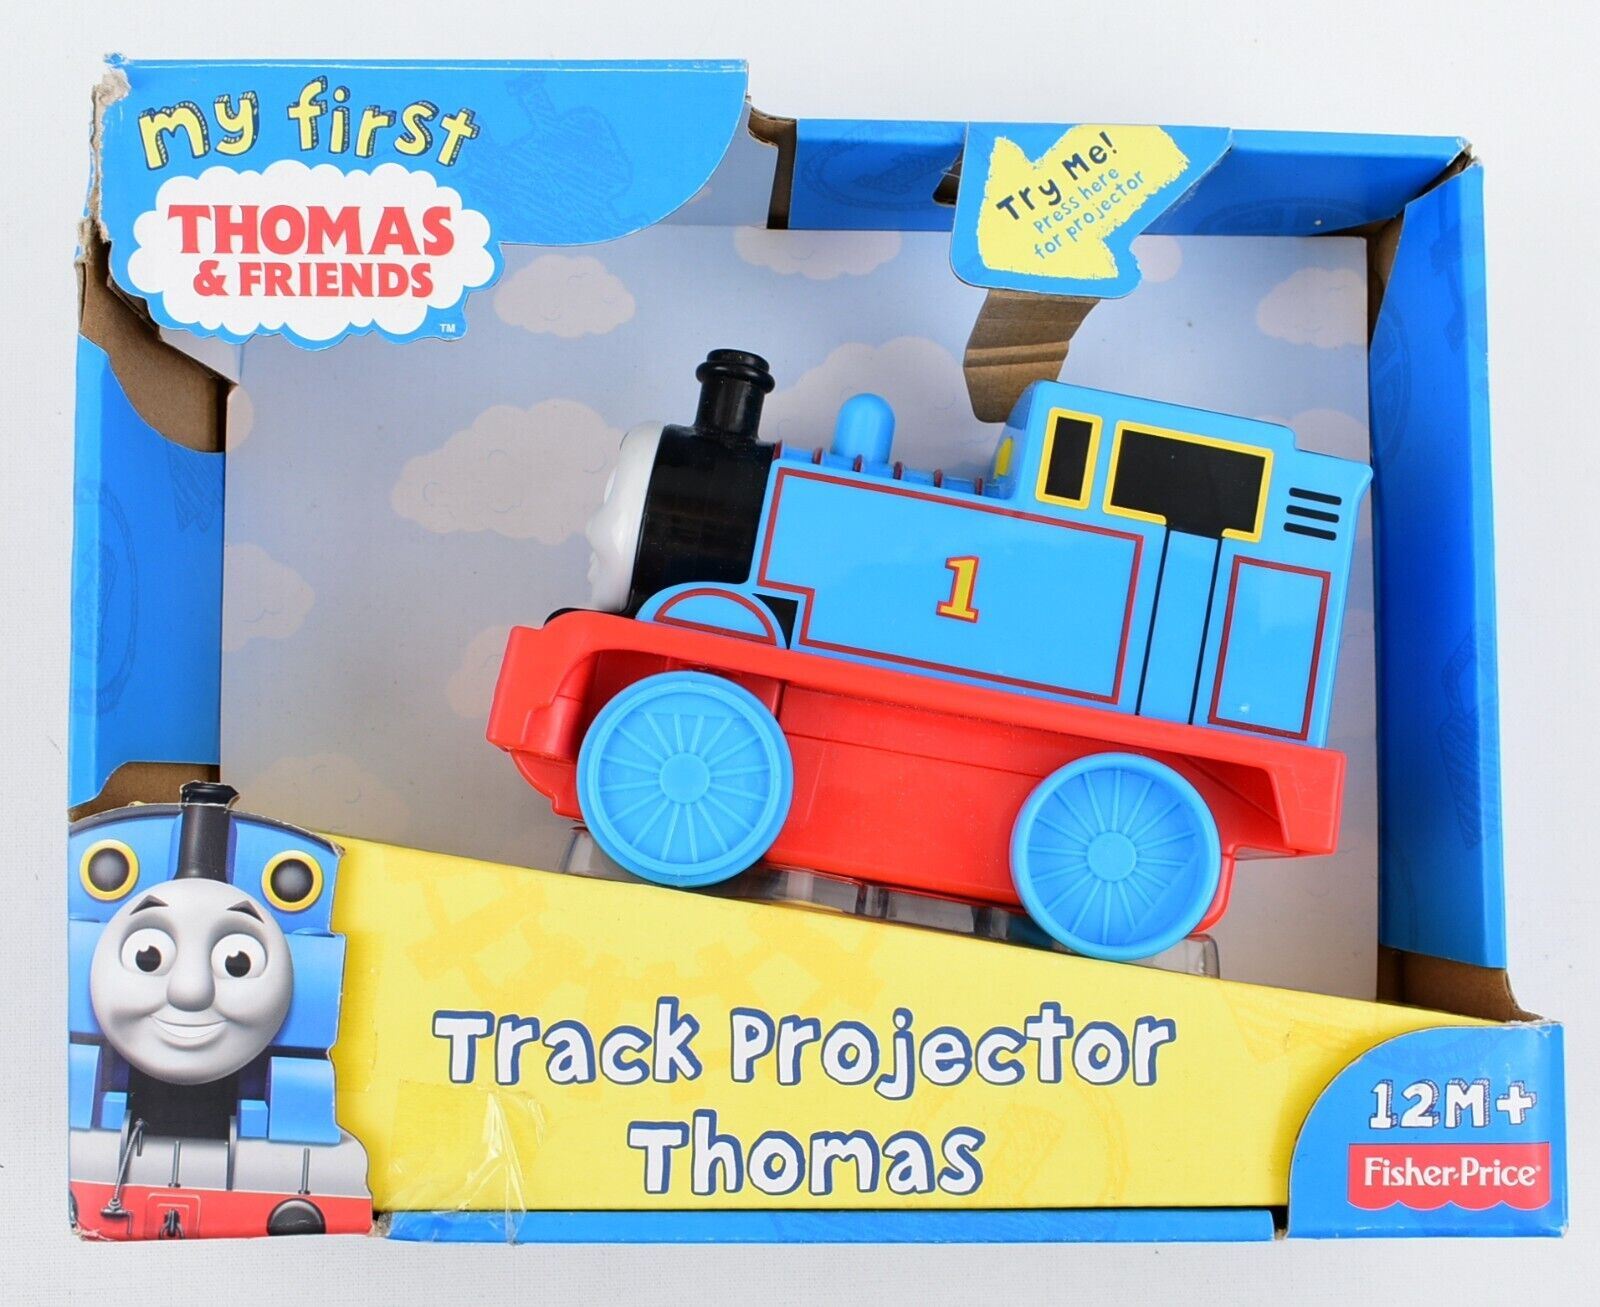 THOMAS & FRIENDS Lights & Sounds Tract Projector by Fisher-Price, 12m+